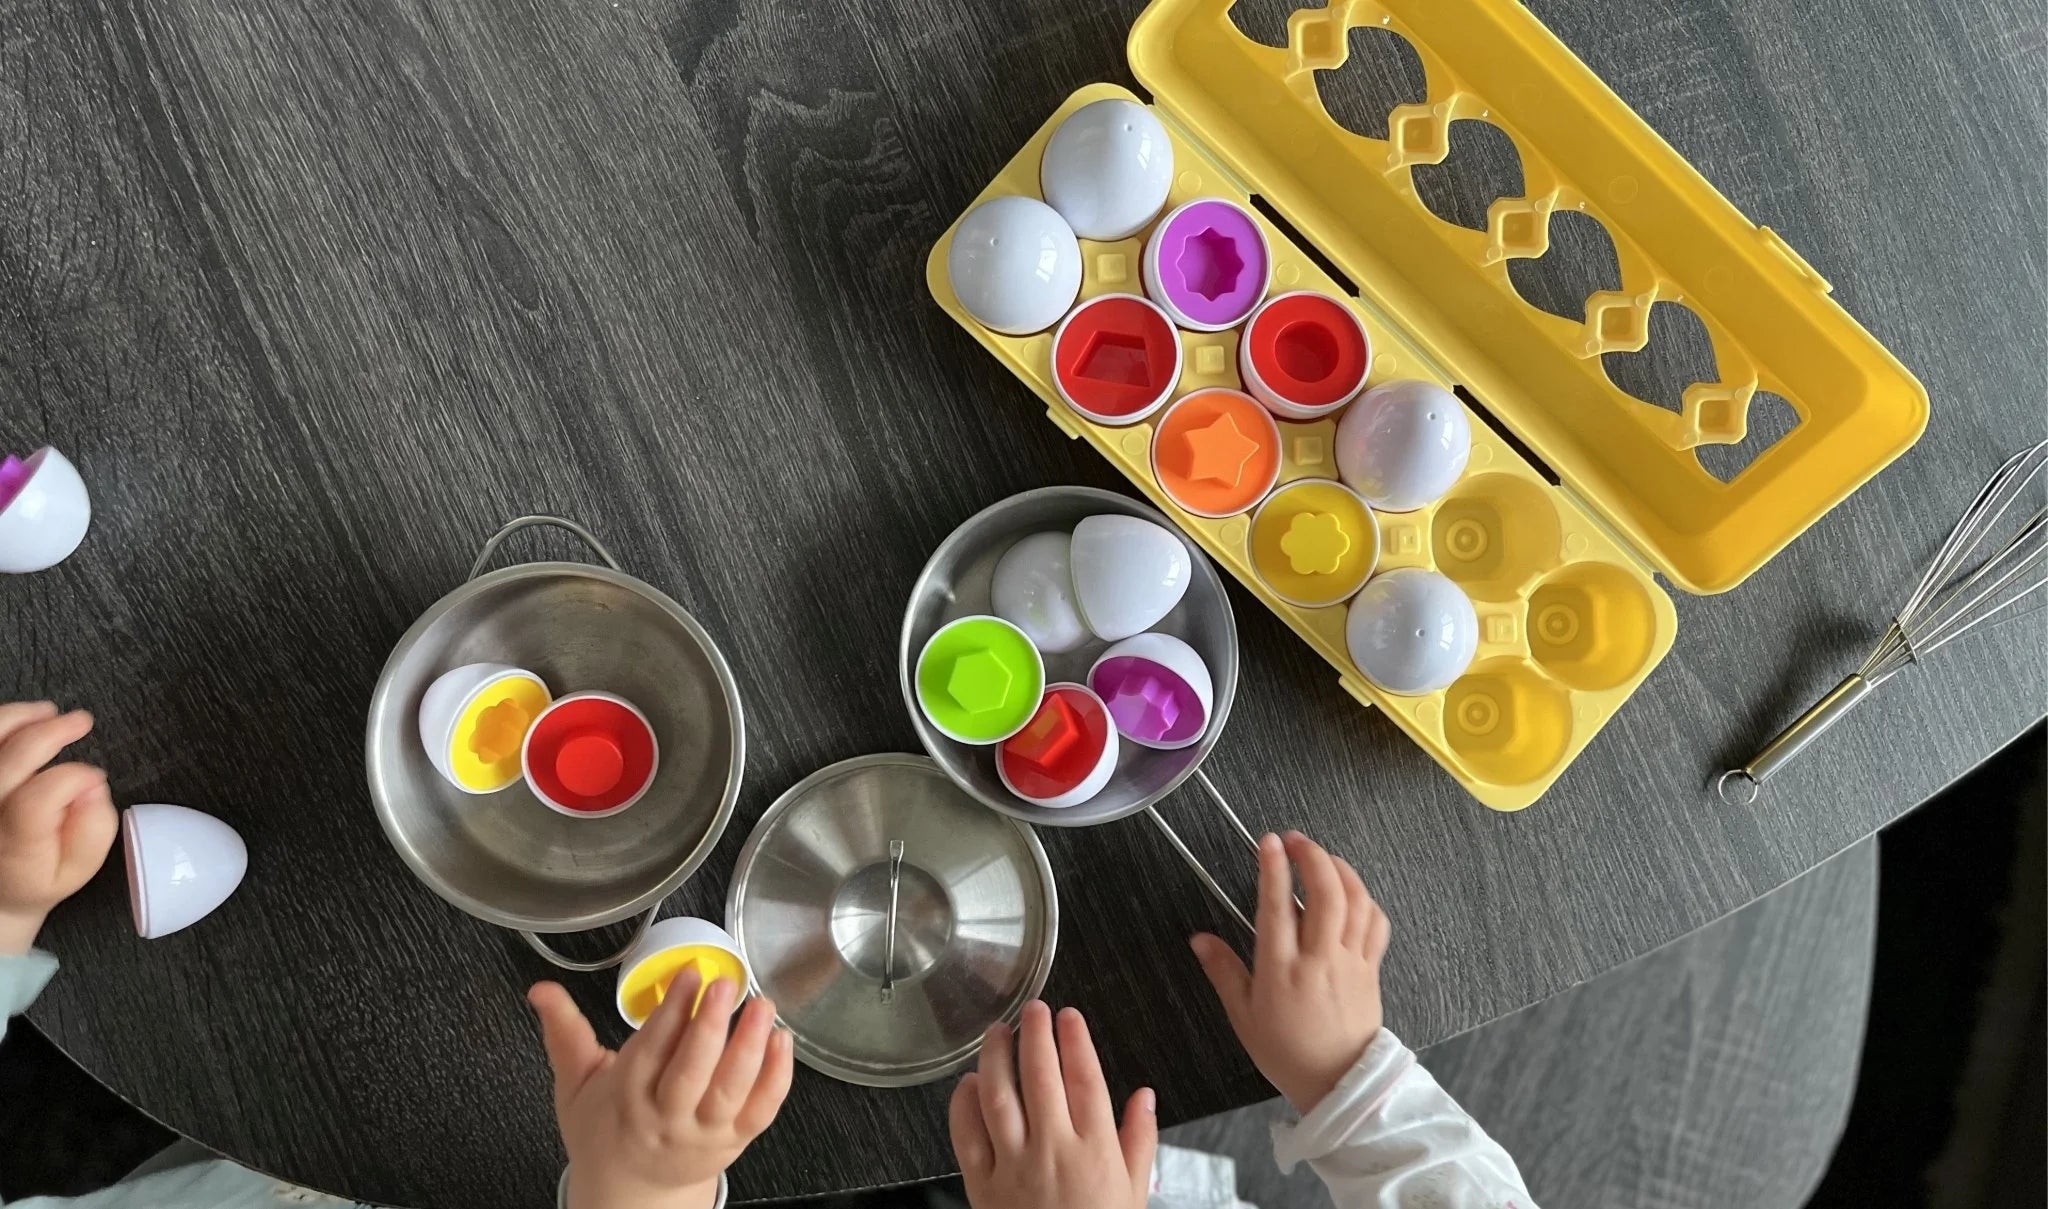 Do you want to know how to teach children colours and shapes properly? We'll show you how to do it. We have five fun activities for you